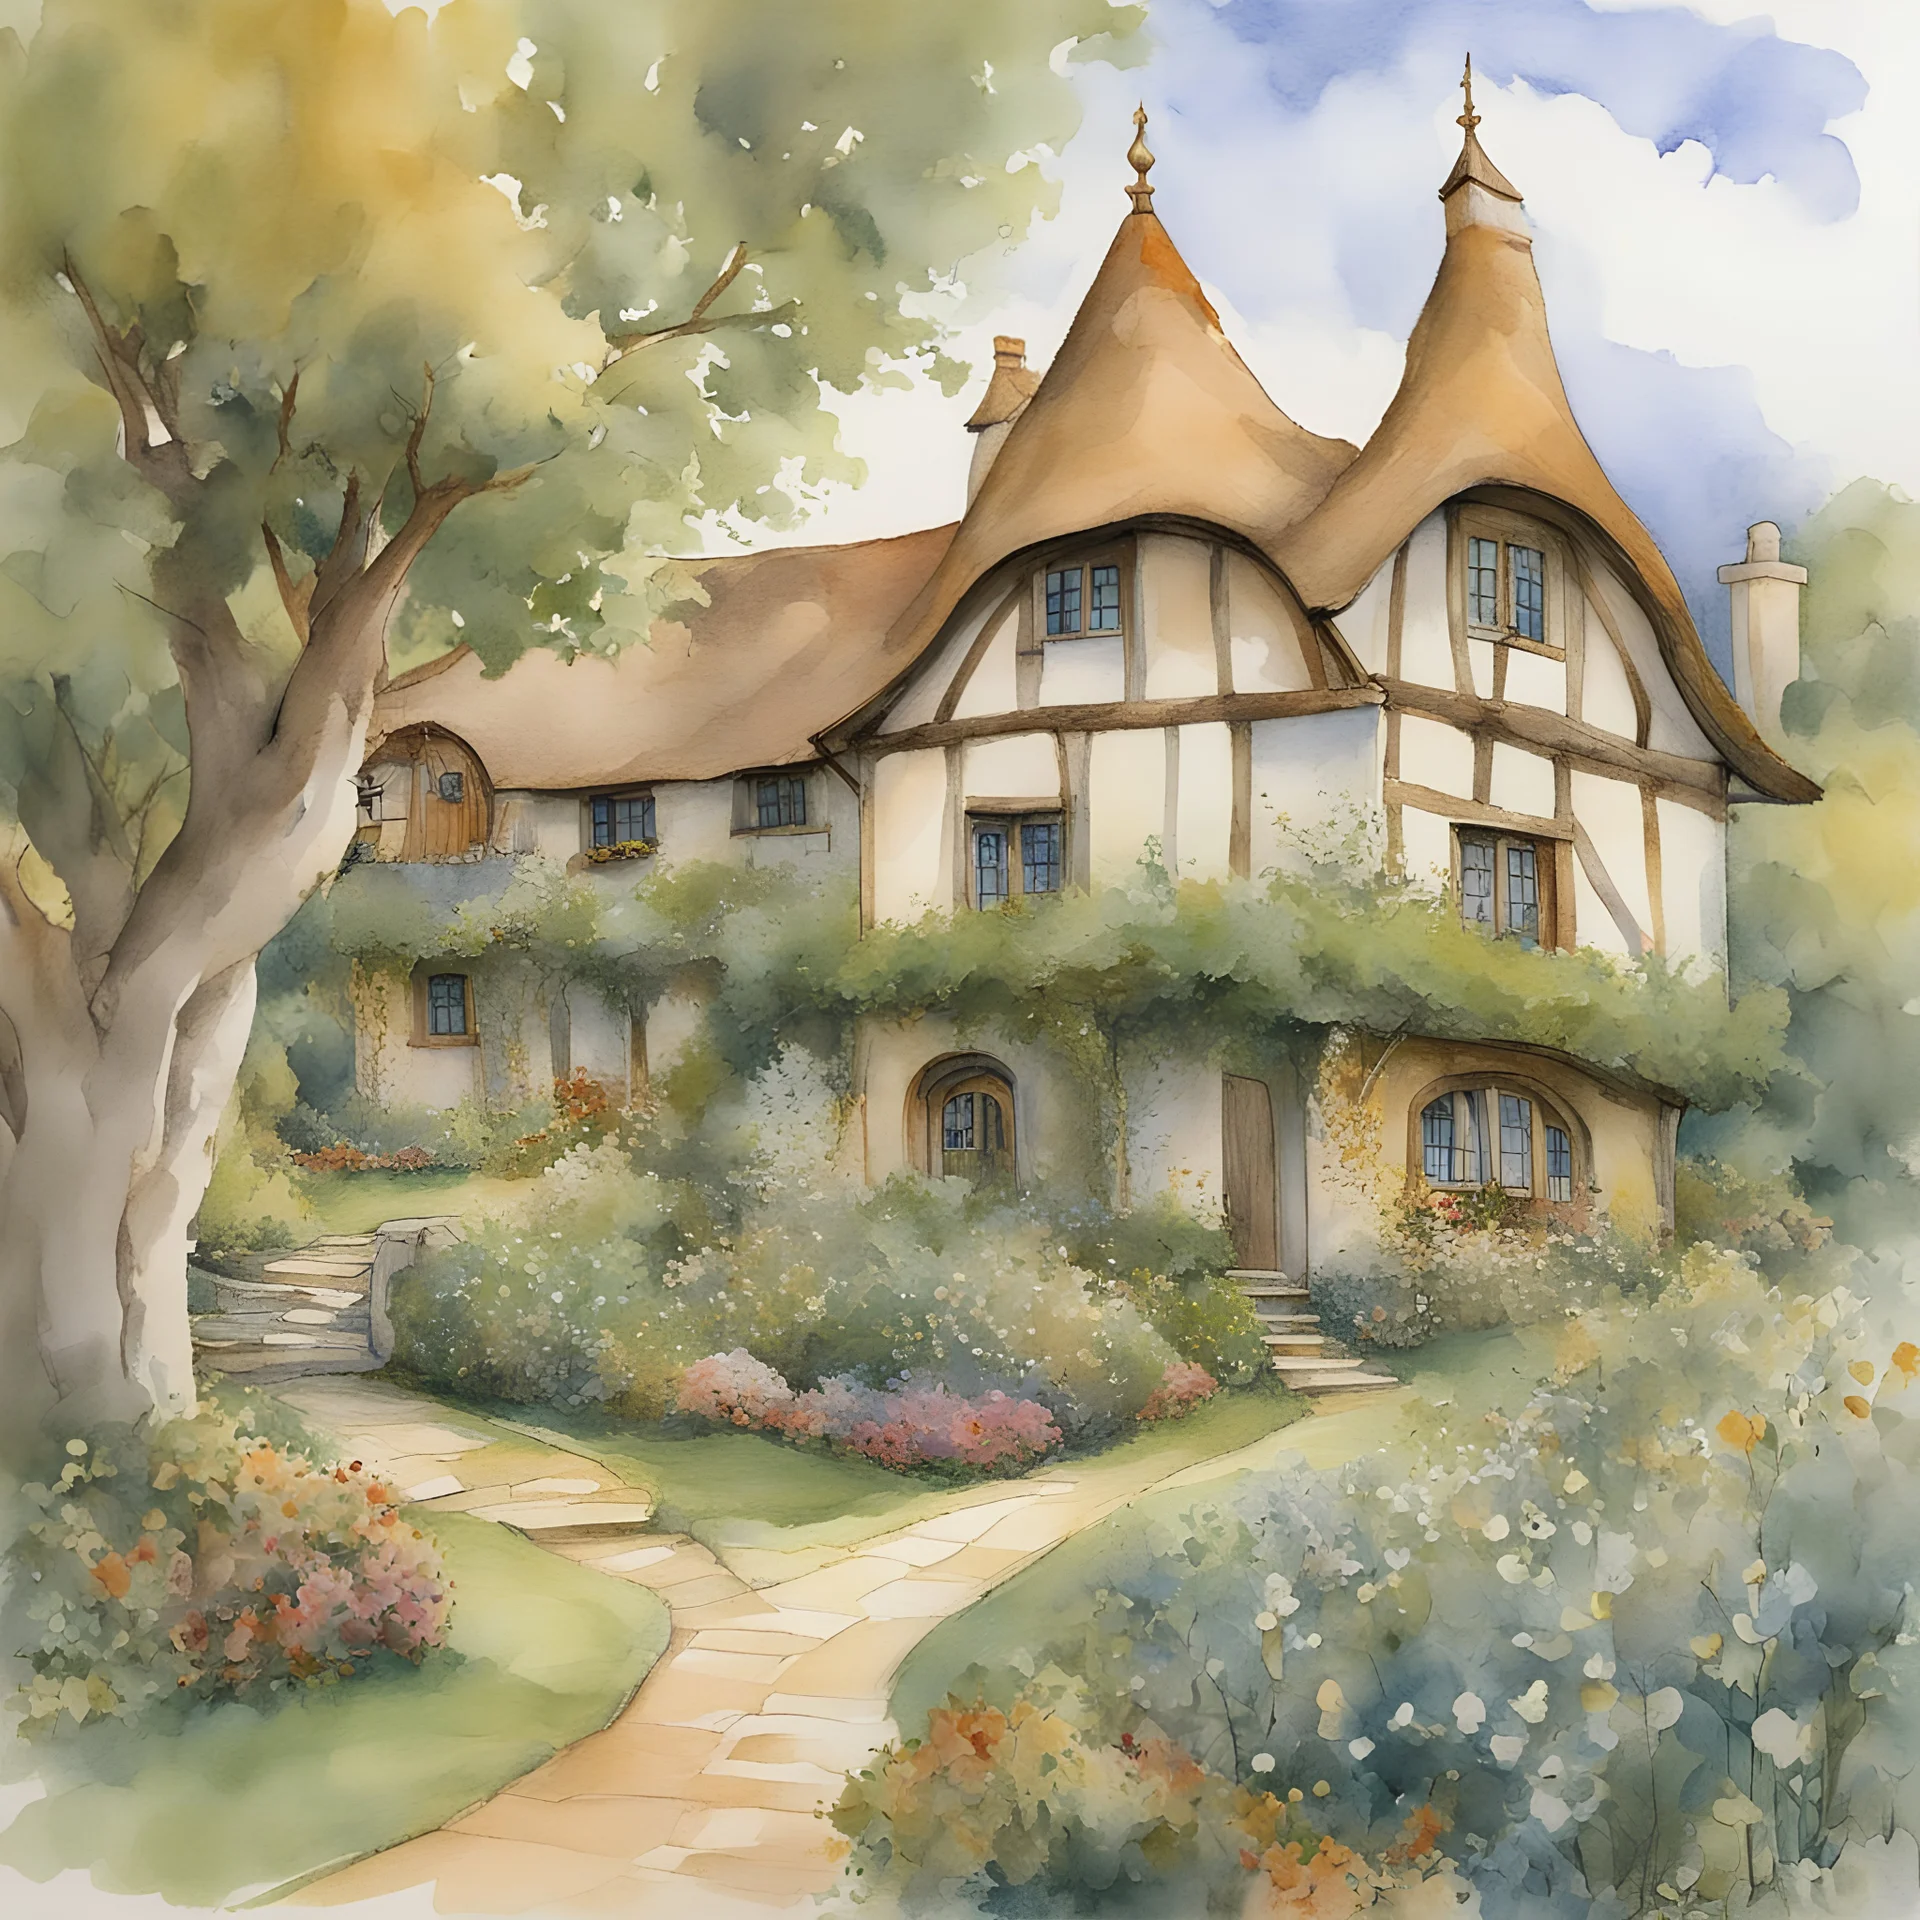 Style Cézanne, luxury, dream world, calm beauty, fantasy world, magic, beautiful composition, exquisite detail, hobbiton, sketch drawing, lineart, watercolour